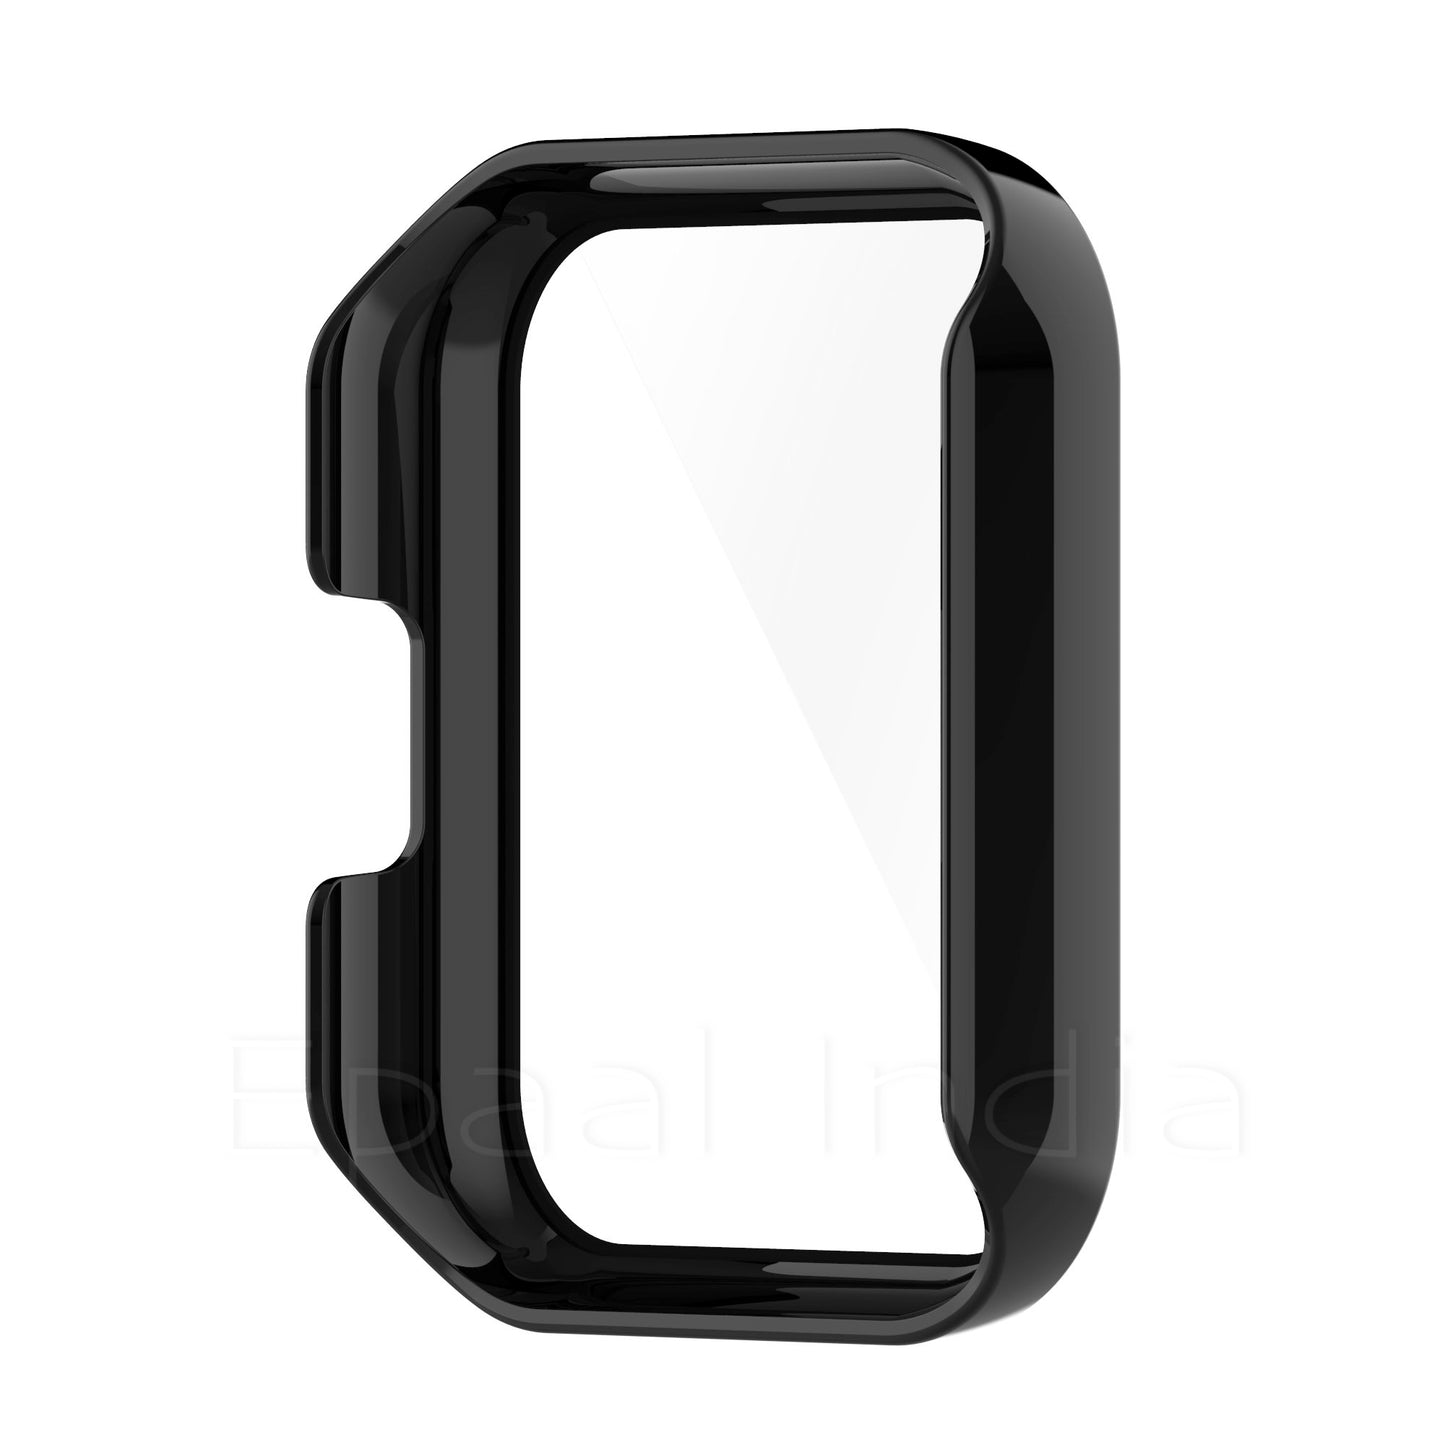 Epaal Hard Shell Bumper Case for Realme Watch 2 Pro, Screen & Body Protection Case, Anti Scratch 360, Shockproof PC Case - Black